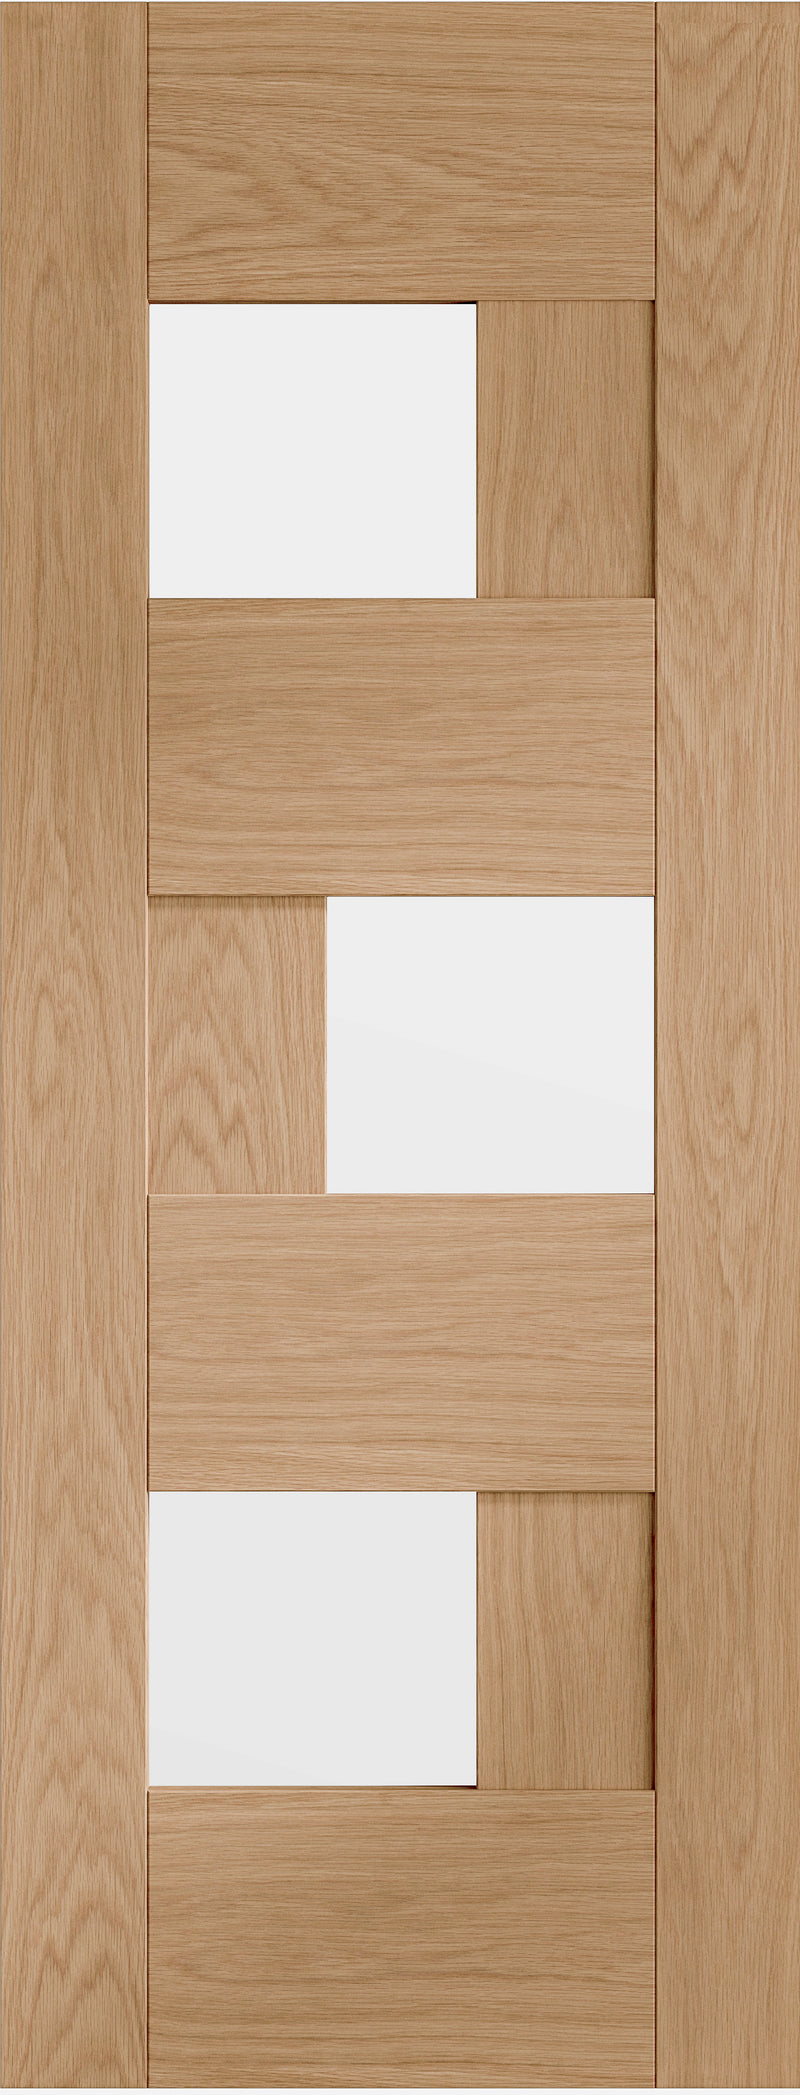 Perugia prefinished iternal oak door with clear glass